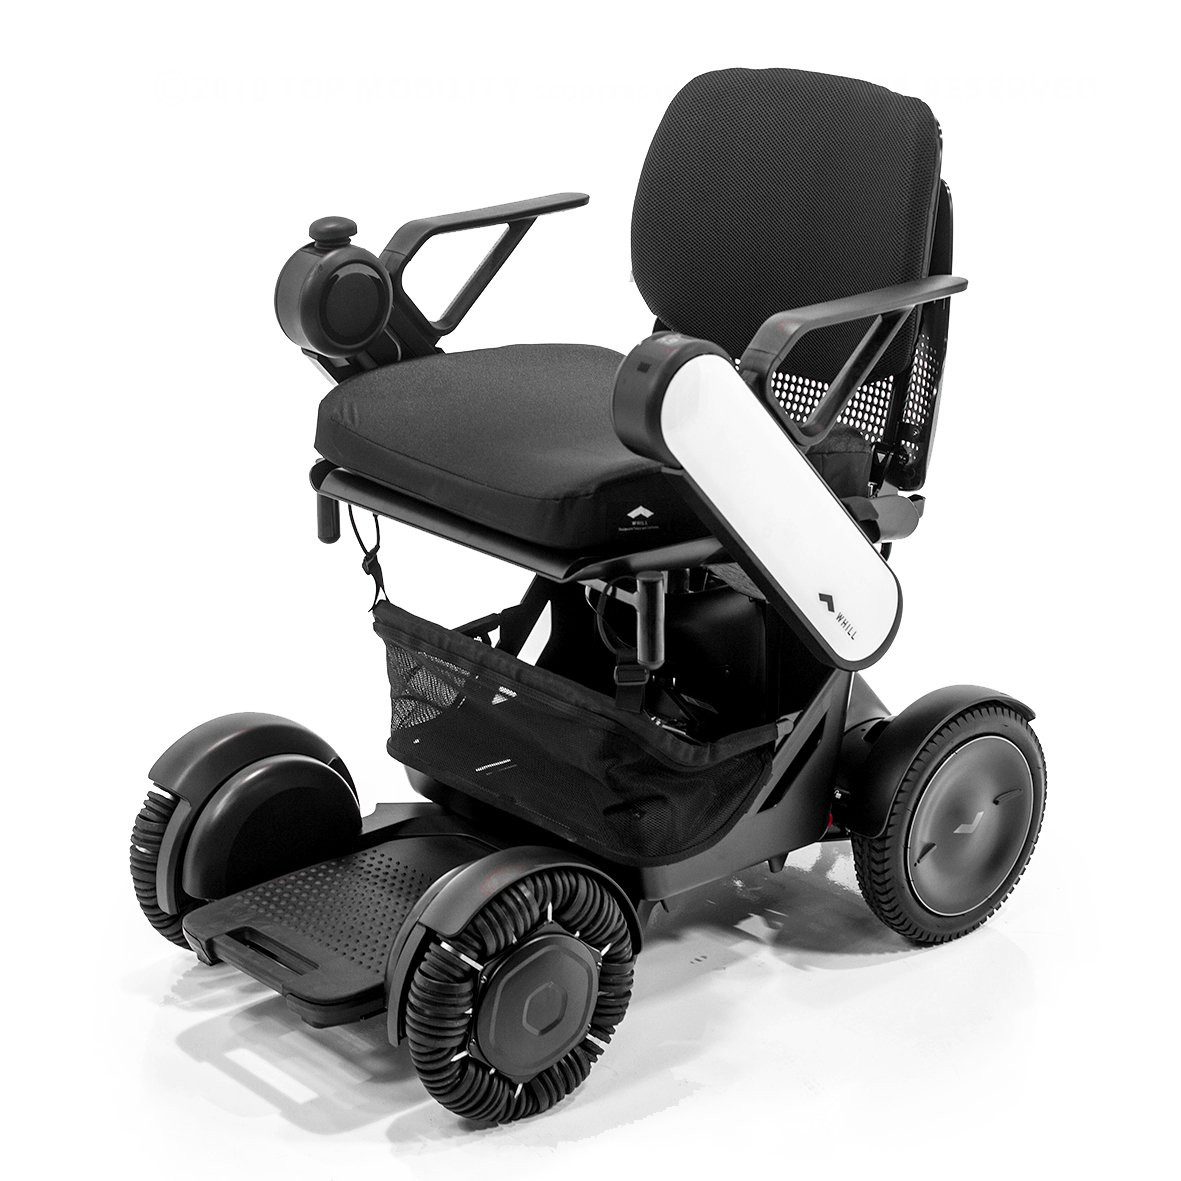 WHill C2 Power Chair